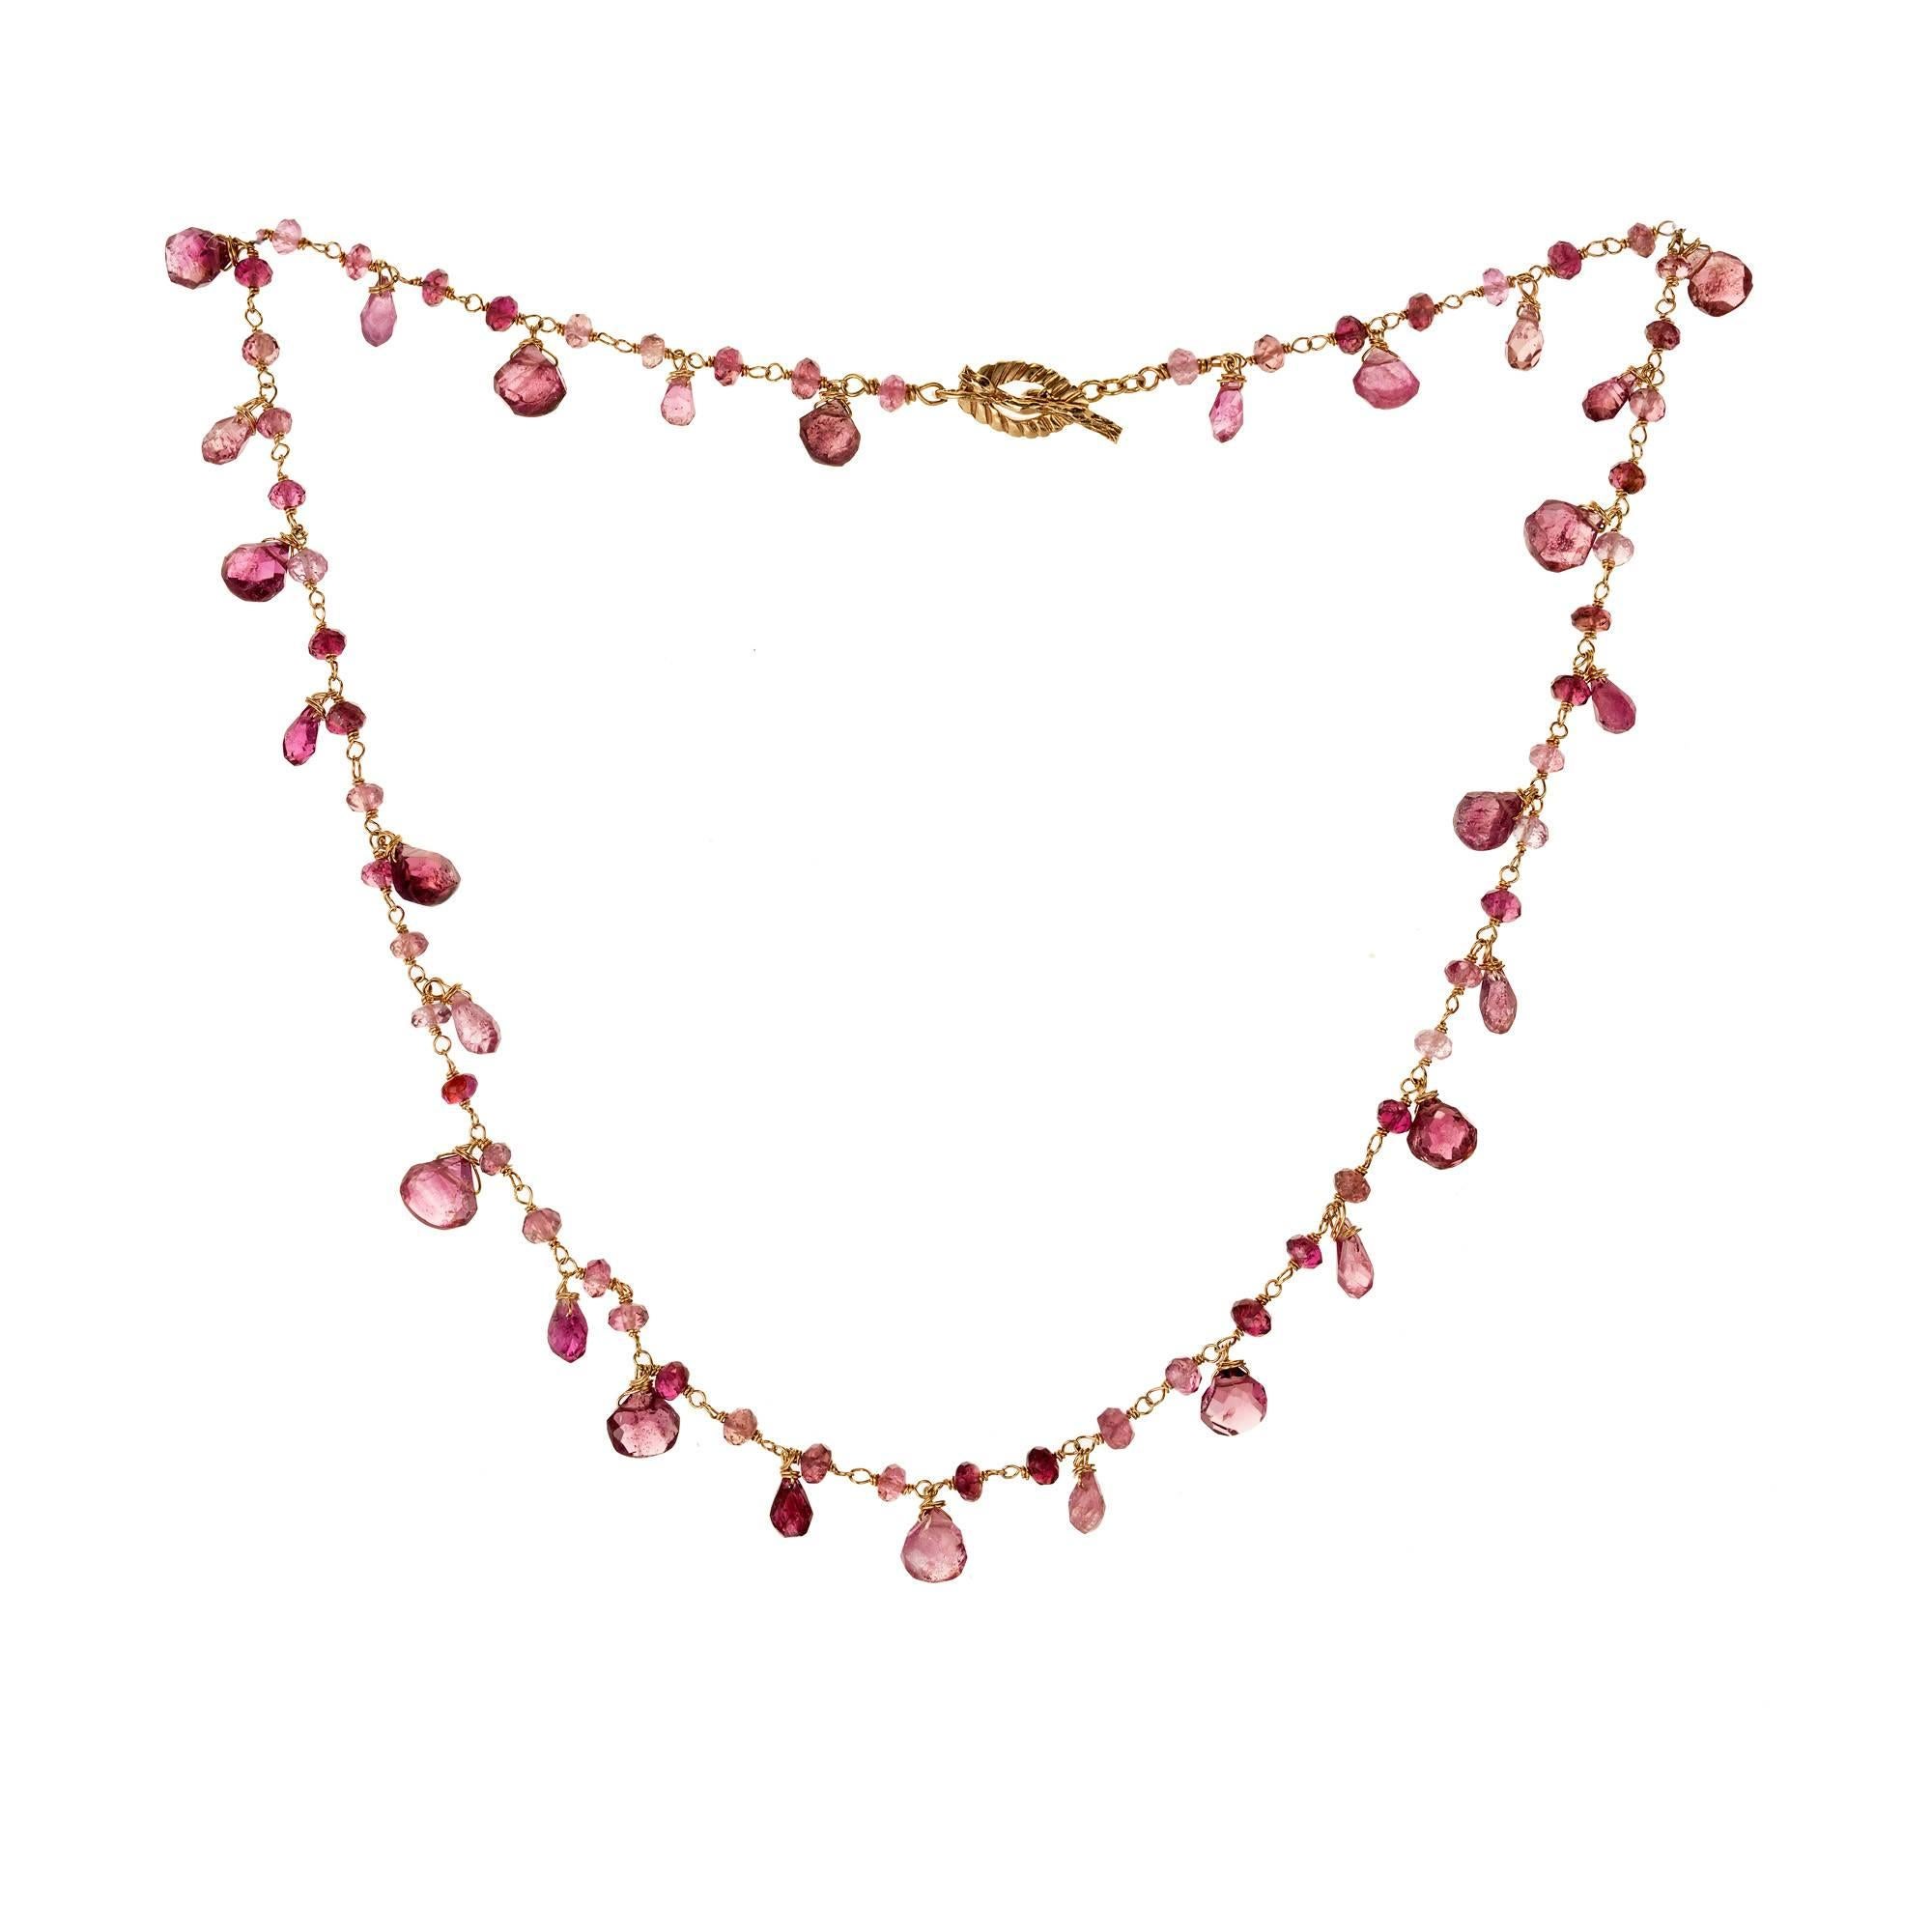 Women's 25.00 Carat Pink Tourmaline Briolettes Gold Wire Toggle Necklace